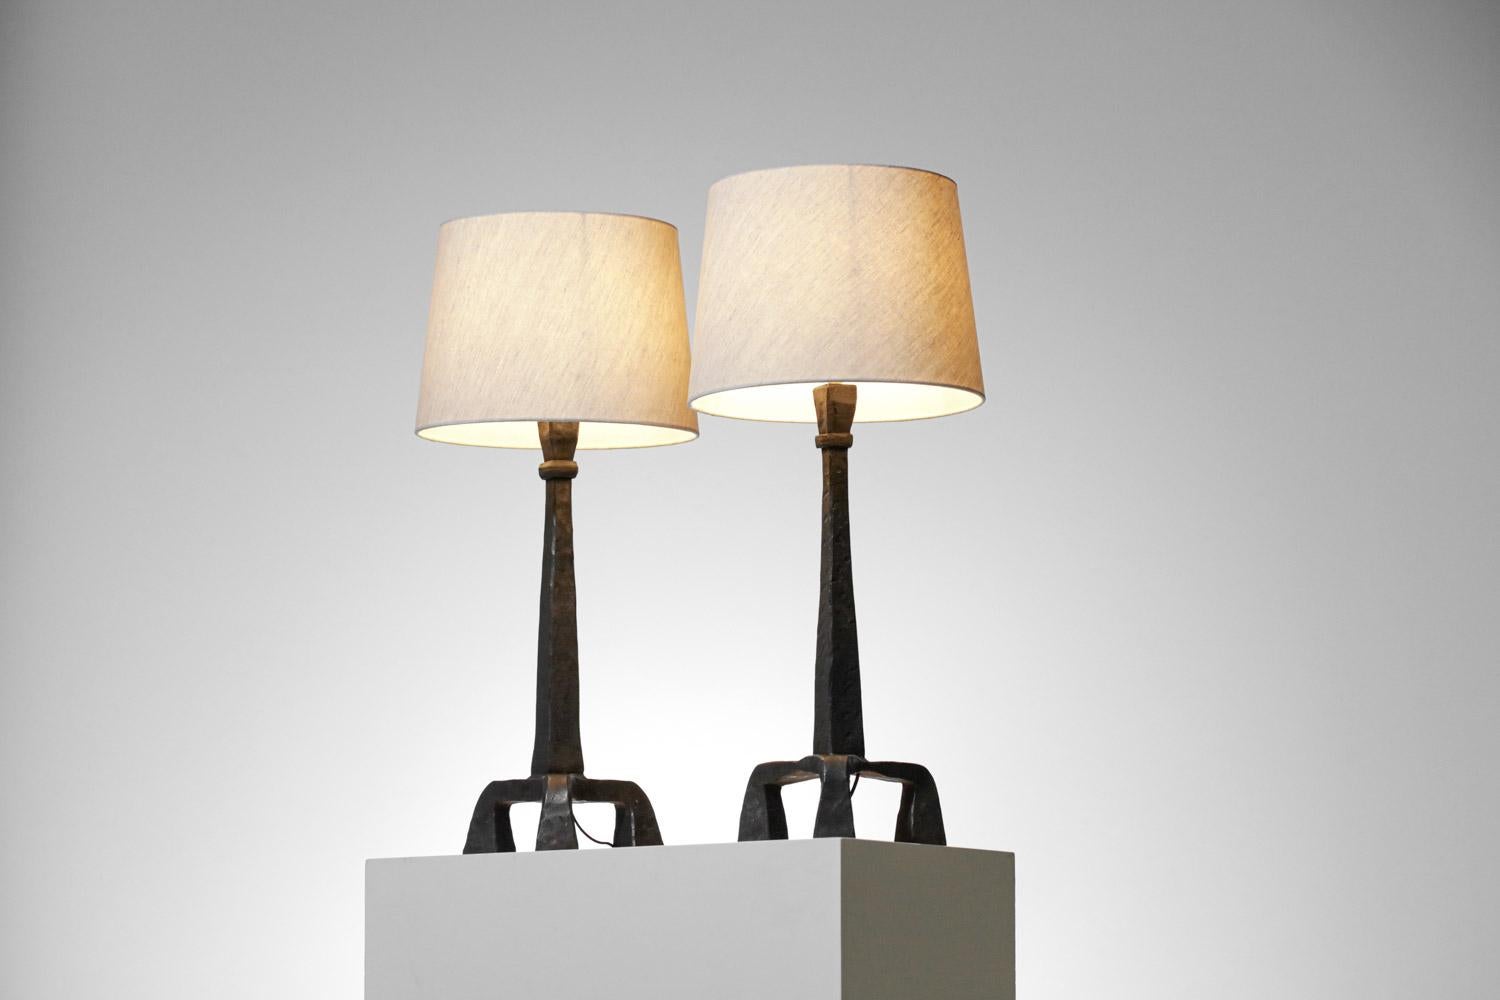 Mid-20th Century Pair of Tripod Table Lamps in Wrought Iron Diego Giacometti Style, F647